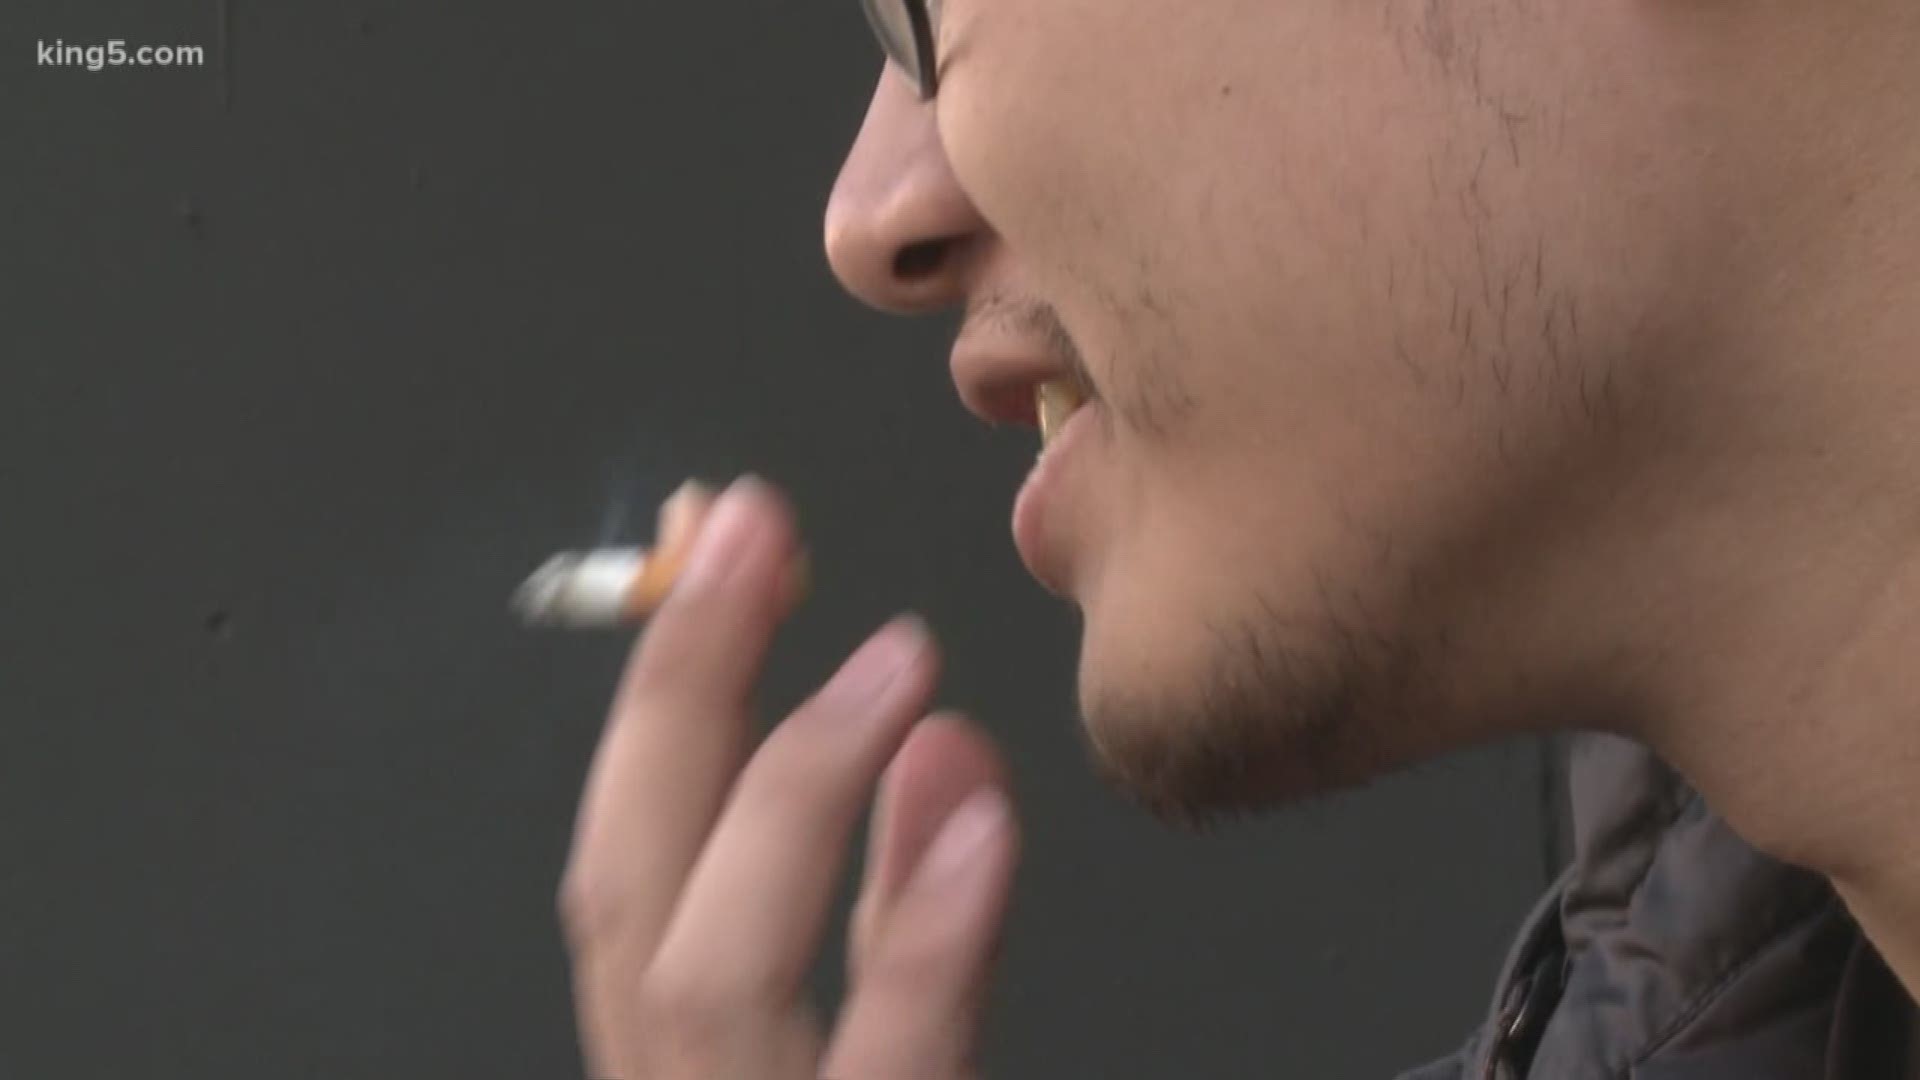 Cancer survivors and those who have lost loved ones to smoking related illnesses are hoping lawmakers vote to raise the age of smoking from 18 to 21. The scientists at Fred Hutch are sharing their knowledge and a new app that could help cancer survivors live longer. KING 5's Amity Addrisi has the story in Healthlink.